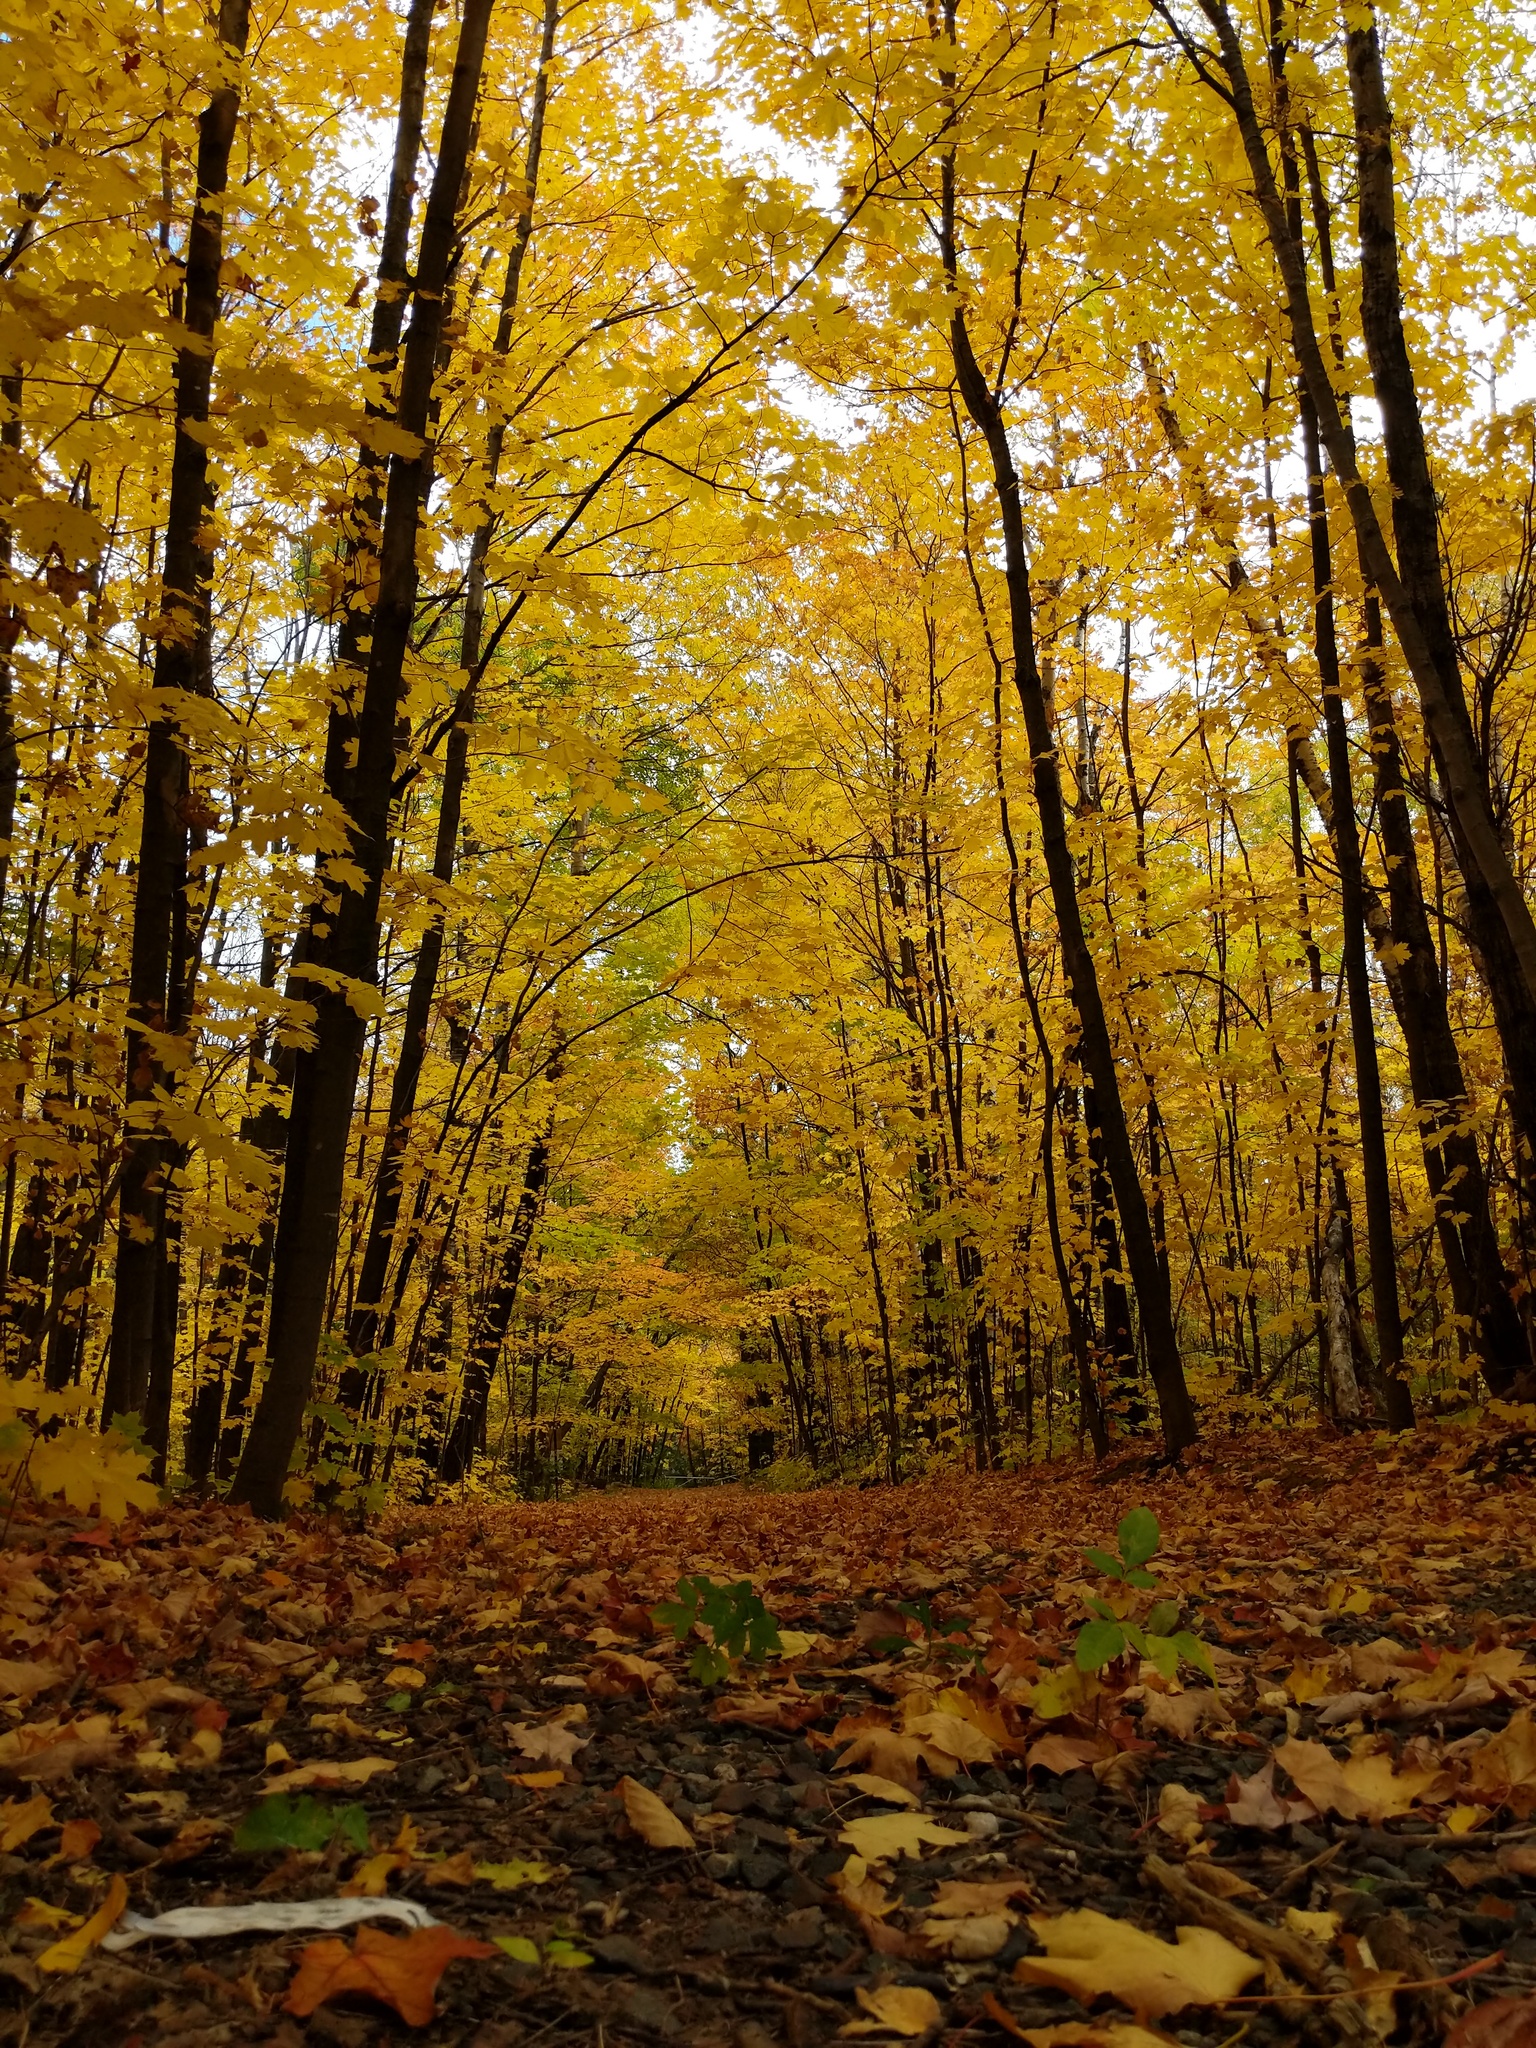 An autumn forest scene, looking down a path with scattered fall leaves. Overhead, a golden yellow canopy of sugar maple leaves contrasts against nearly black, straight tree trunks.